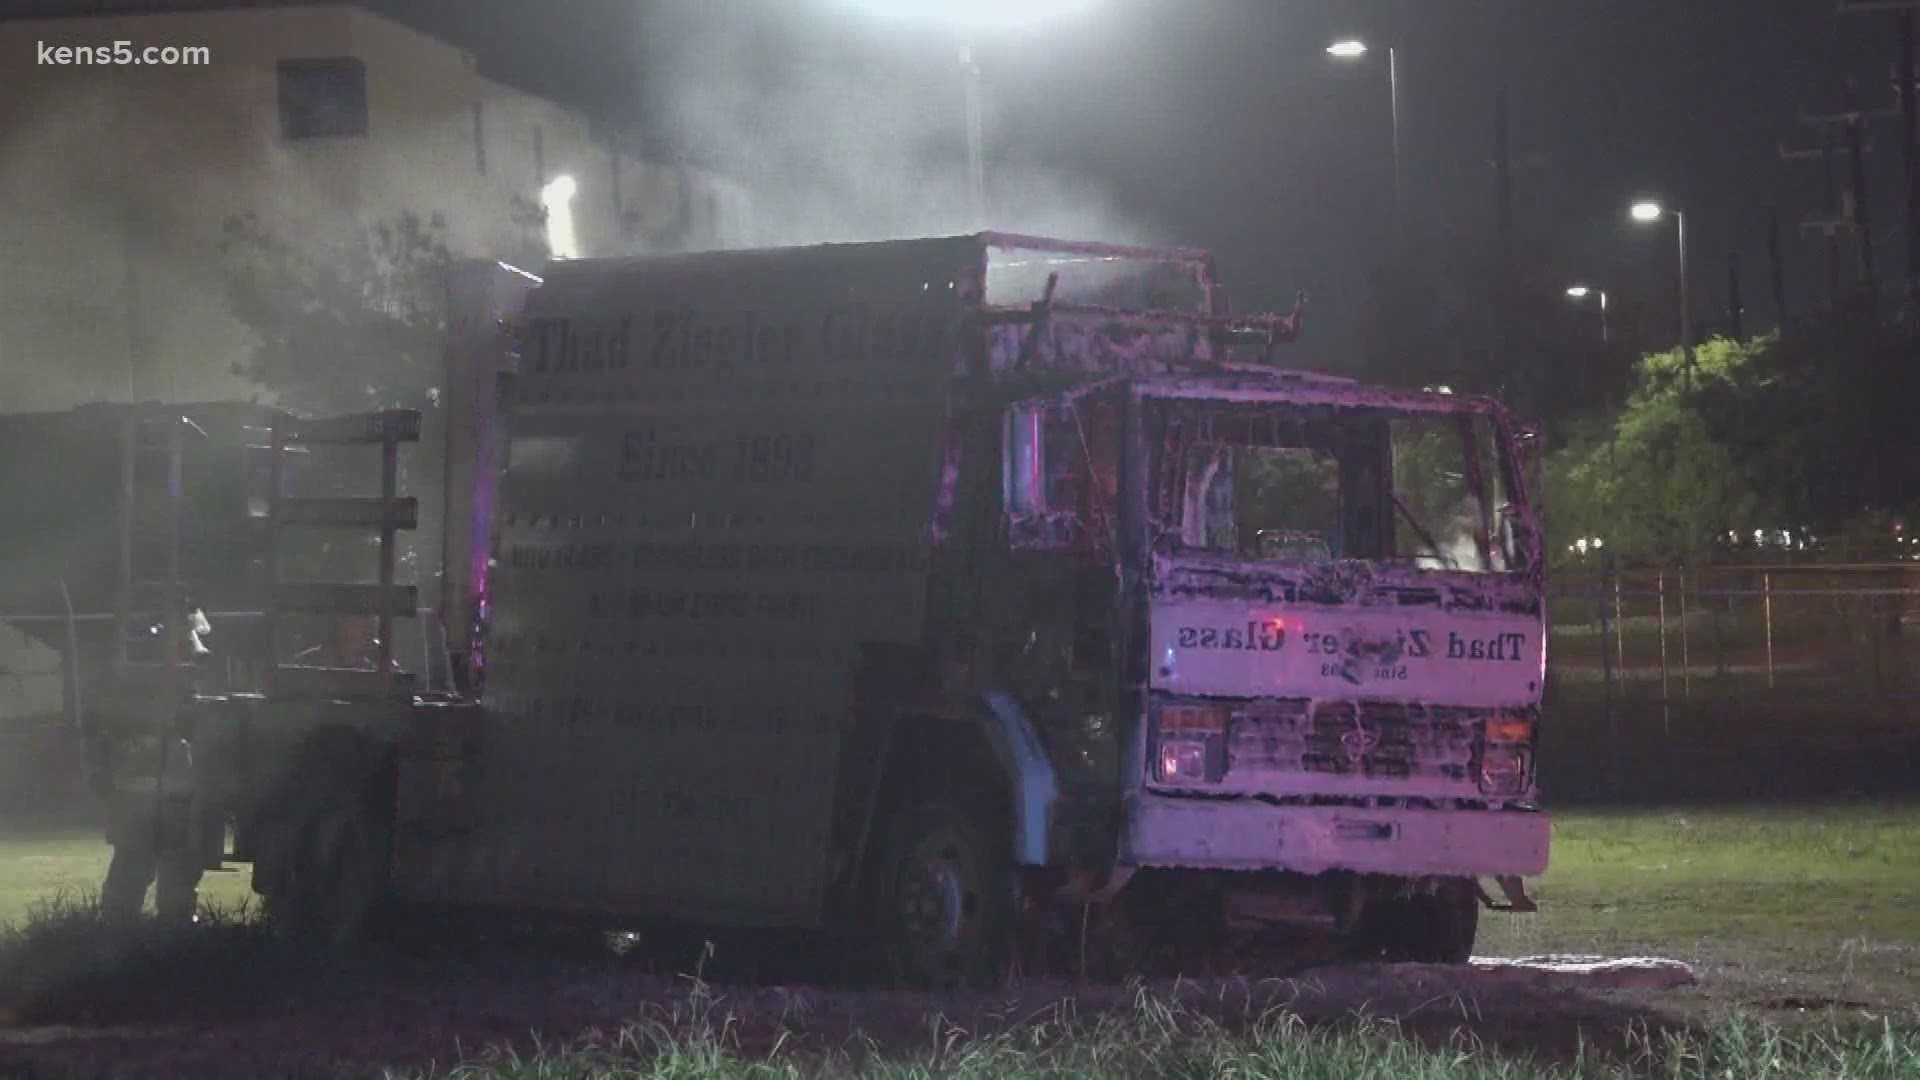 Police said a semi truck that was used for advertising was "fully engulfed with flames" when they arrived.